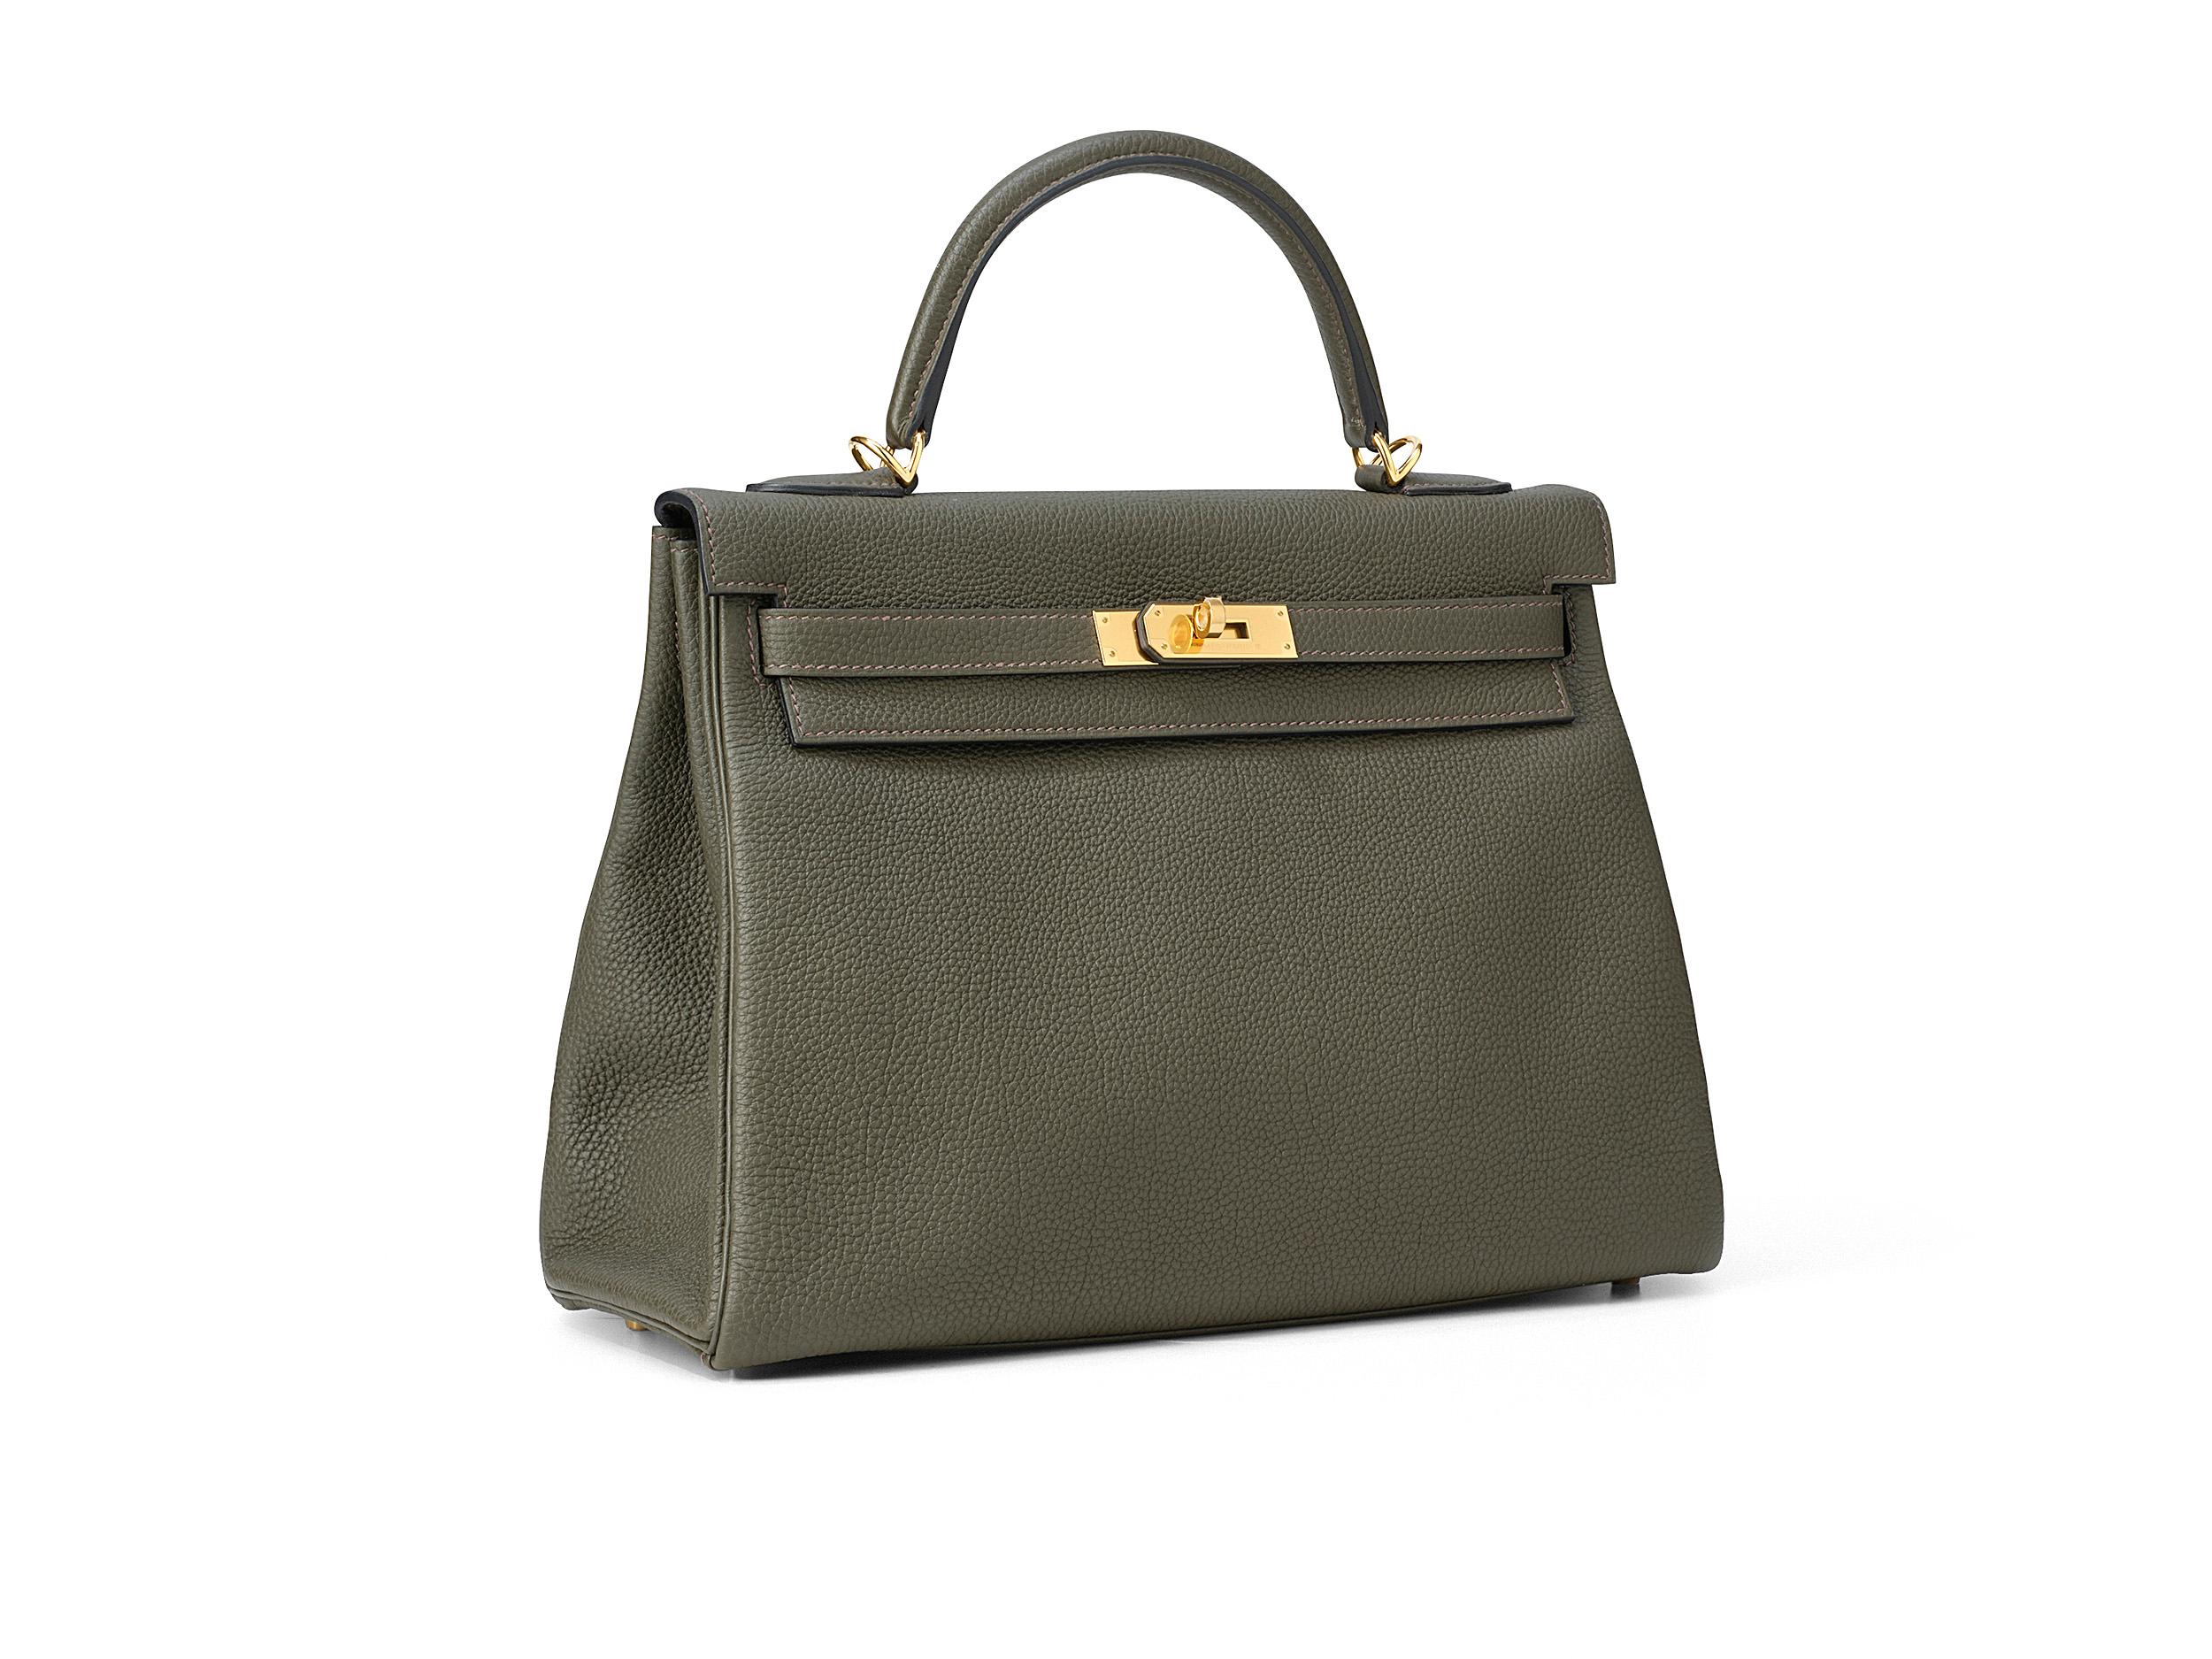 Hermès Kelly 32 in vert de gris and togo leather with gold hardware. The bag is unworn and comes as full set including the original receipt.

Stamp Y (2020) 

